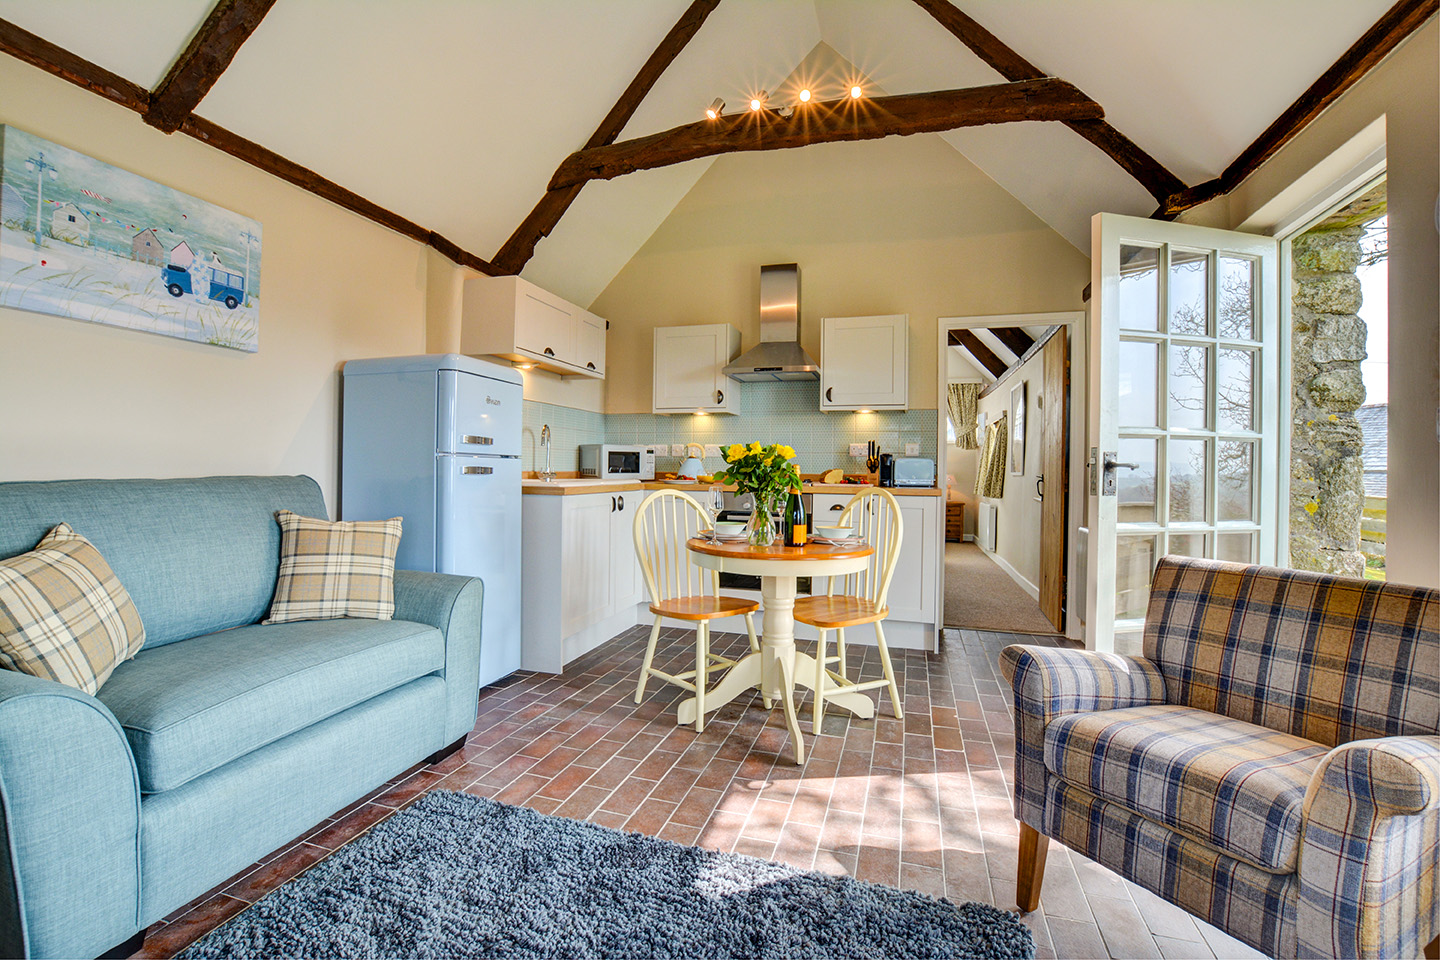 The lounge kitchen diner at Jingles luxury self catering holiday cottage at Penrose Burden in North Cornwall near Bodmin Moor01.jpg